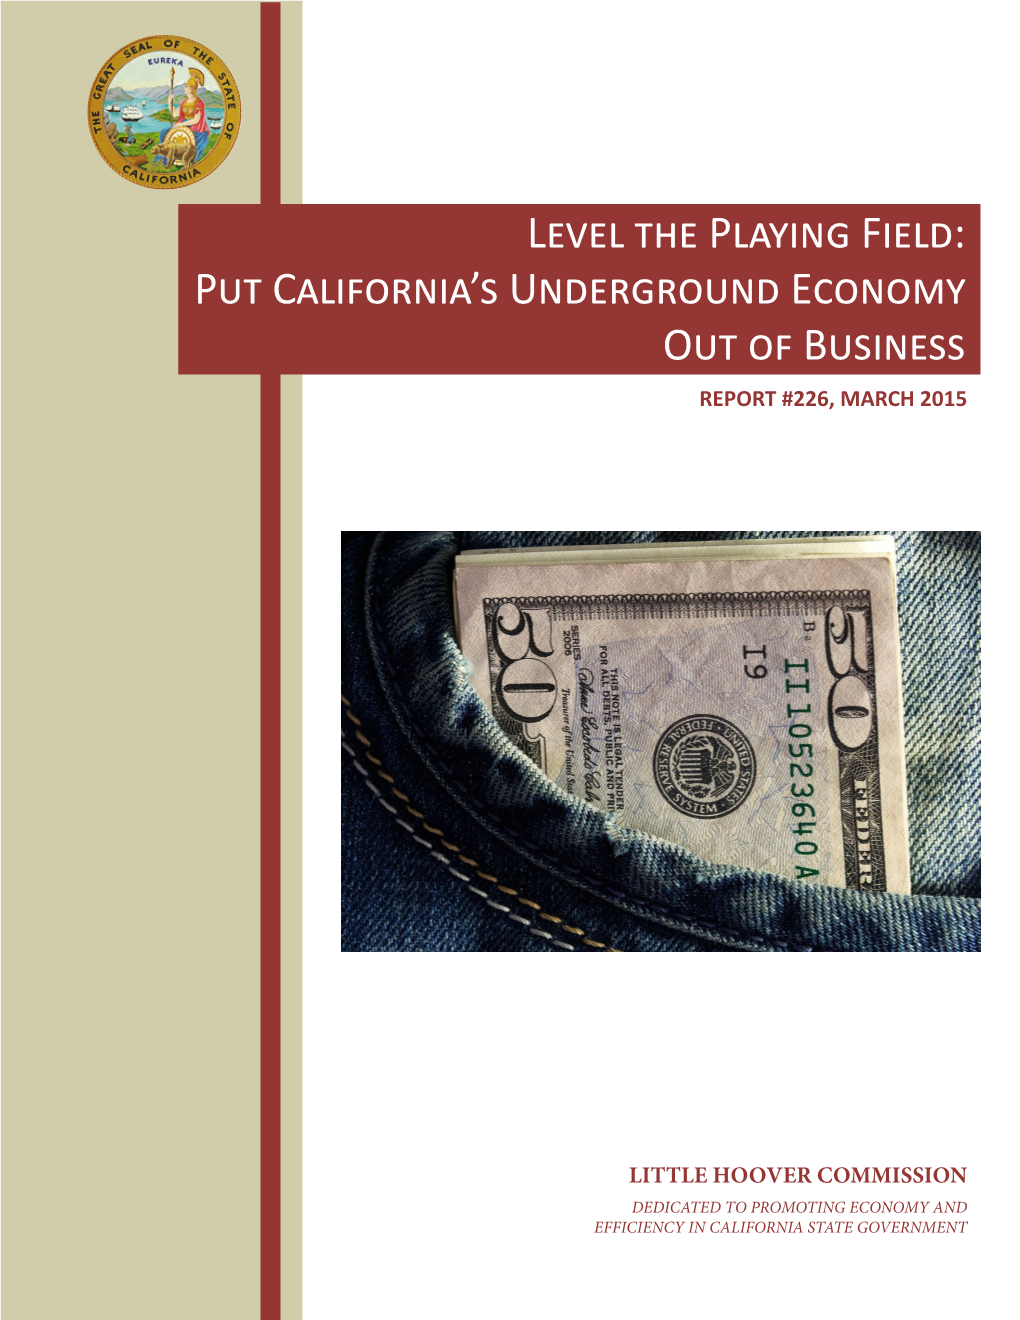 Level the Playing Field: Put California's Underground Economy out of Business (Report #226, March 2015)